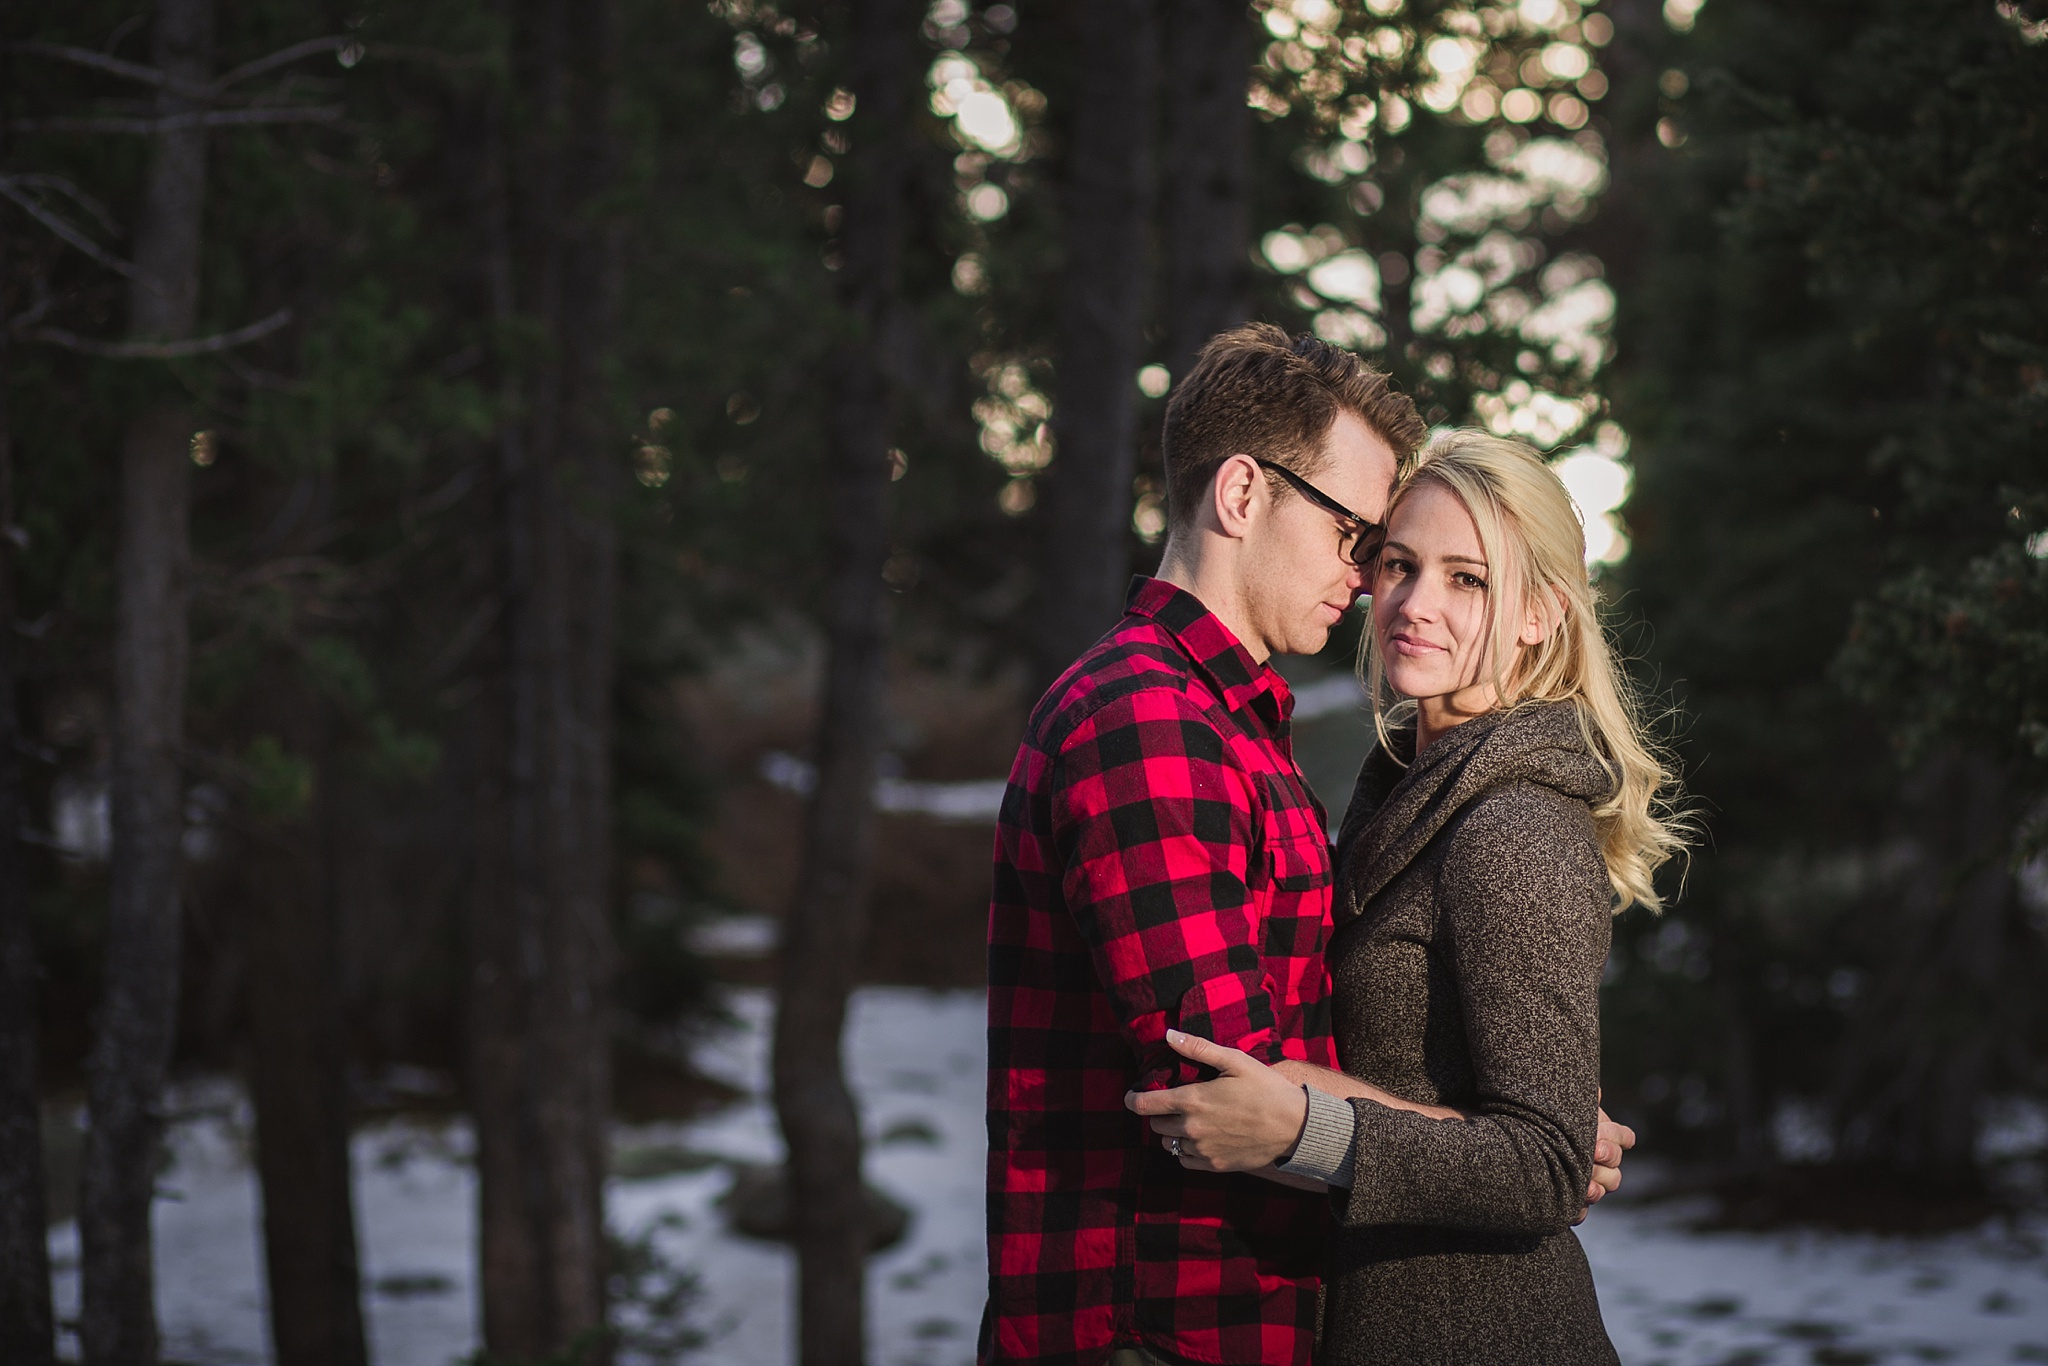 Couple embracing during their mountain engagement session. Amy & Jonathan’s Brainard Lake Winter Engagement Session by Colorado Engagement Photographer, Jennifer Garza. Colorado Engagement Photographer, Colorado Engagement Photography, Brainard Lake Engagement Session, Brainard Lake Engagement Photos, Mountain Engagement Session, Colorado Winter Engagement Photos, Winter Engagement Photography, Mountain Engagement Photographer, Colorado Wedding, Colorado Bride, MagMod